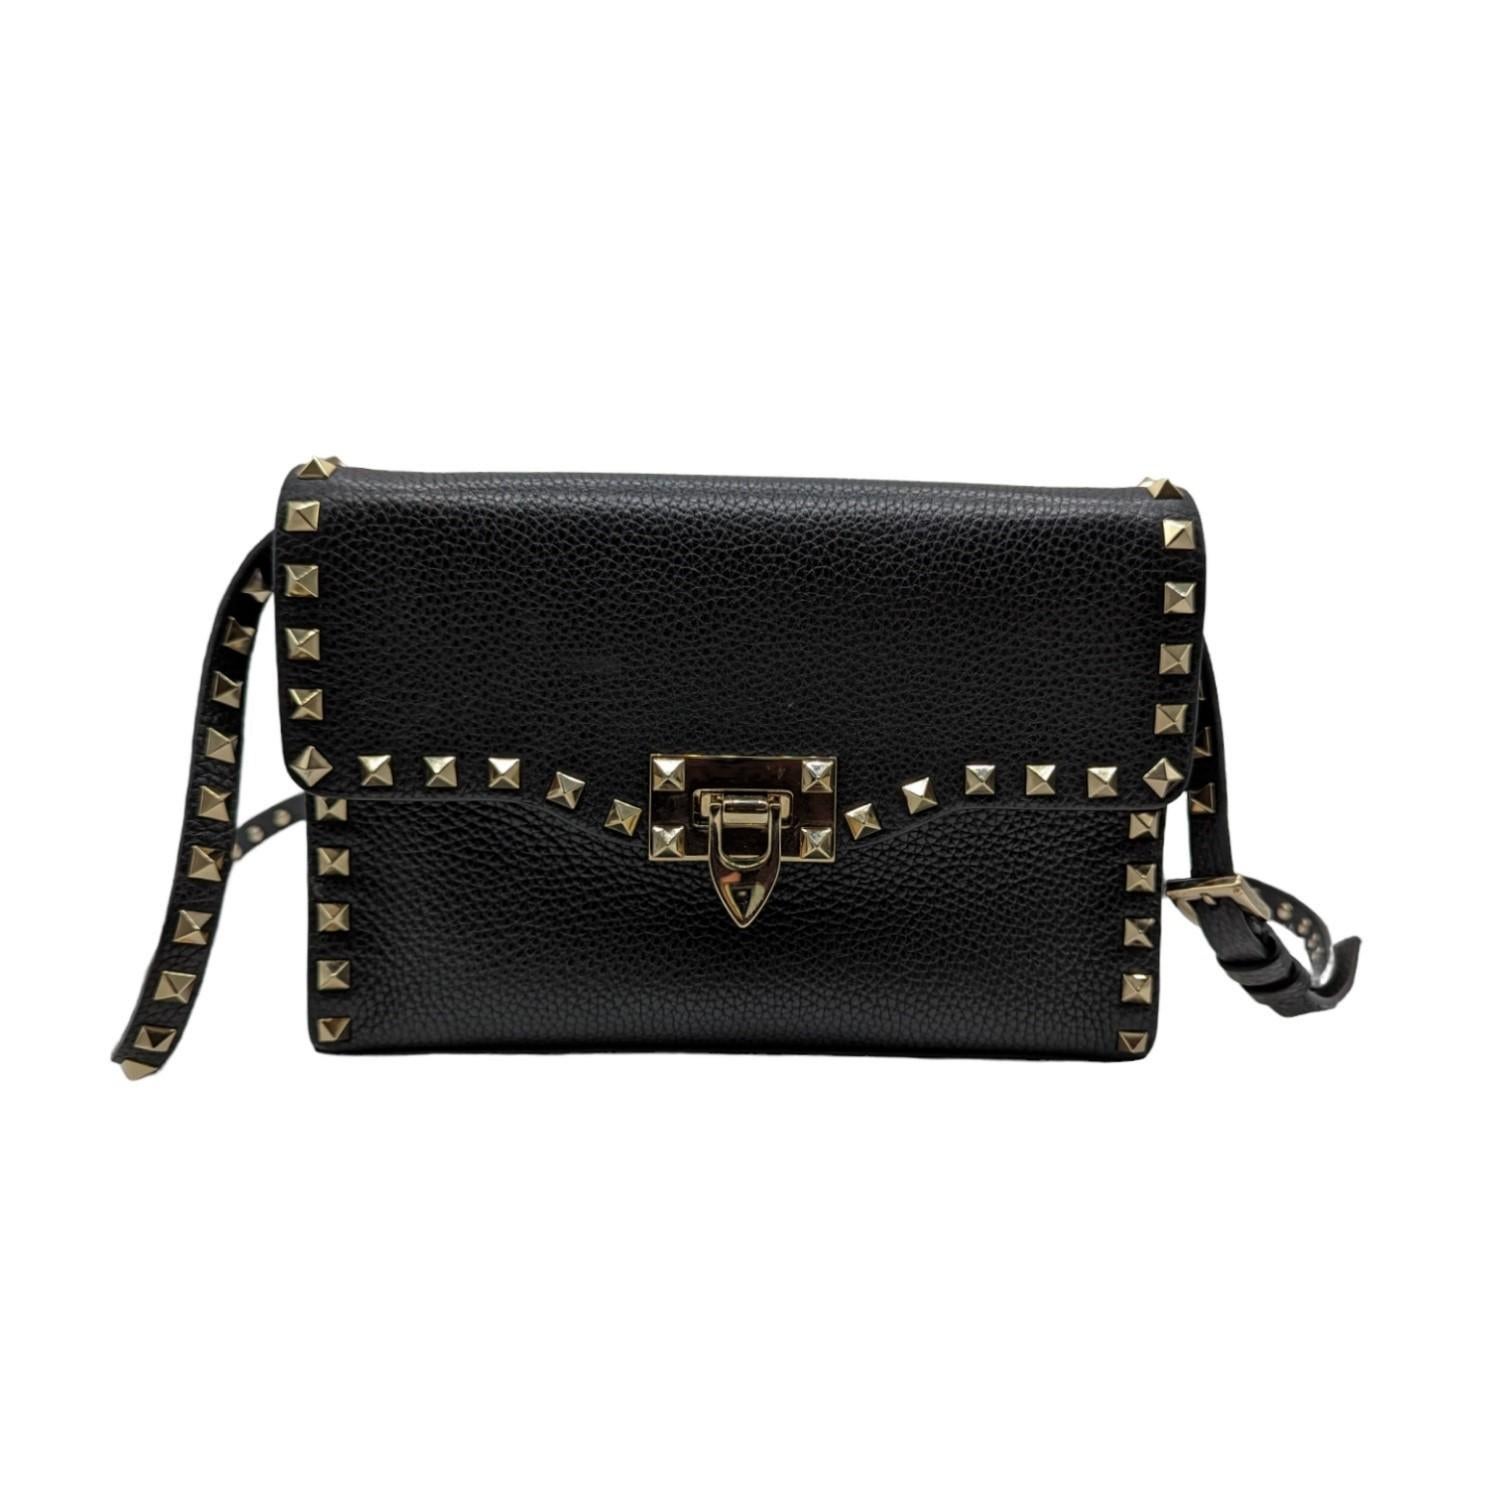 Valentino Garavani the pebbled lamb leather shoulder bag with signature Rockstud trim is lightweight and great for a night out or concert. Est. Retail $1,650.

Designer: Valentino Garavani
Material: Lambskin leather
Origin: Italy
Measurements: 9